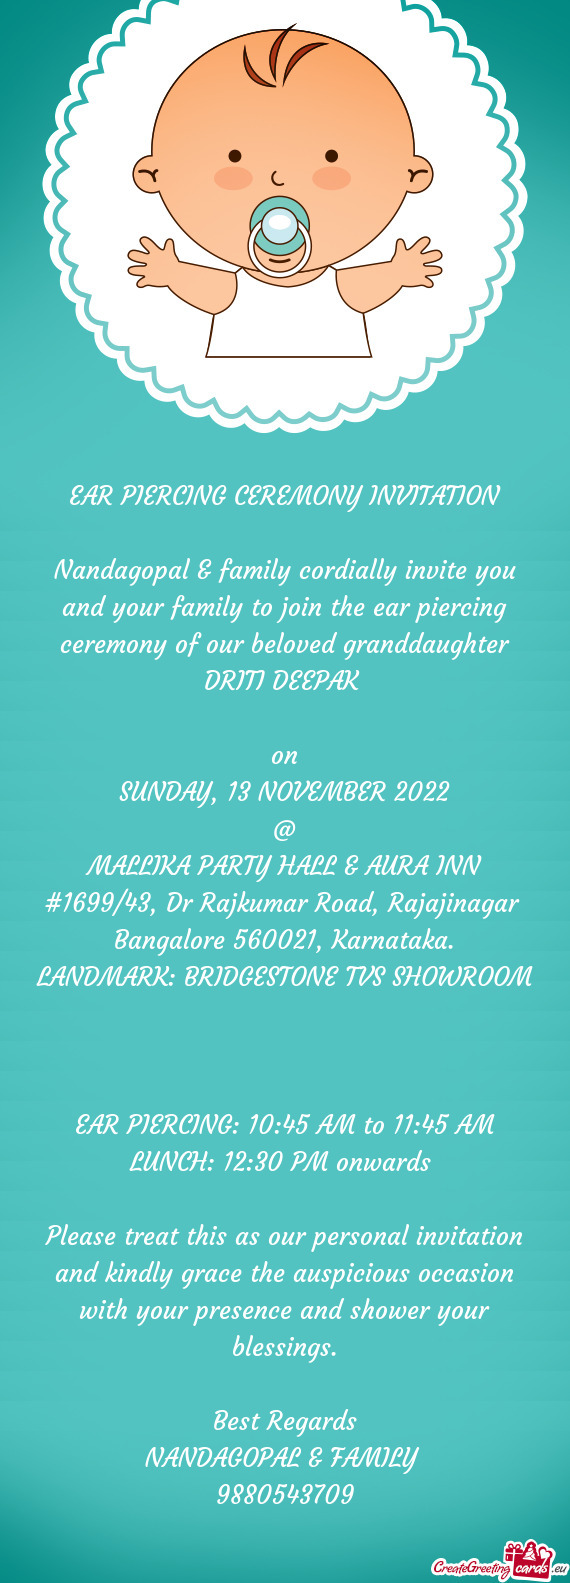 Nandagopal & family cordially invite you and your family to join the ear piercing ceremony of our be